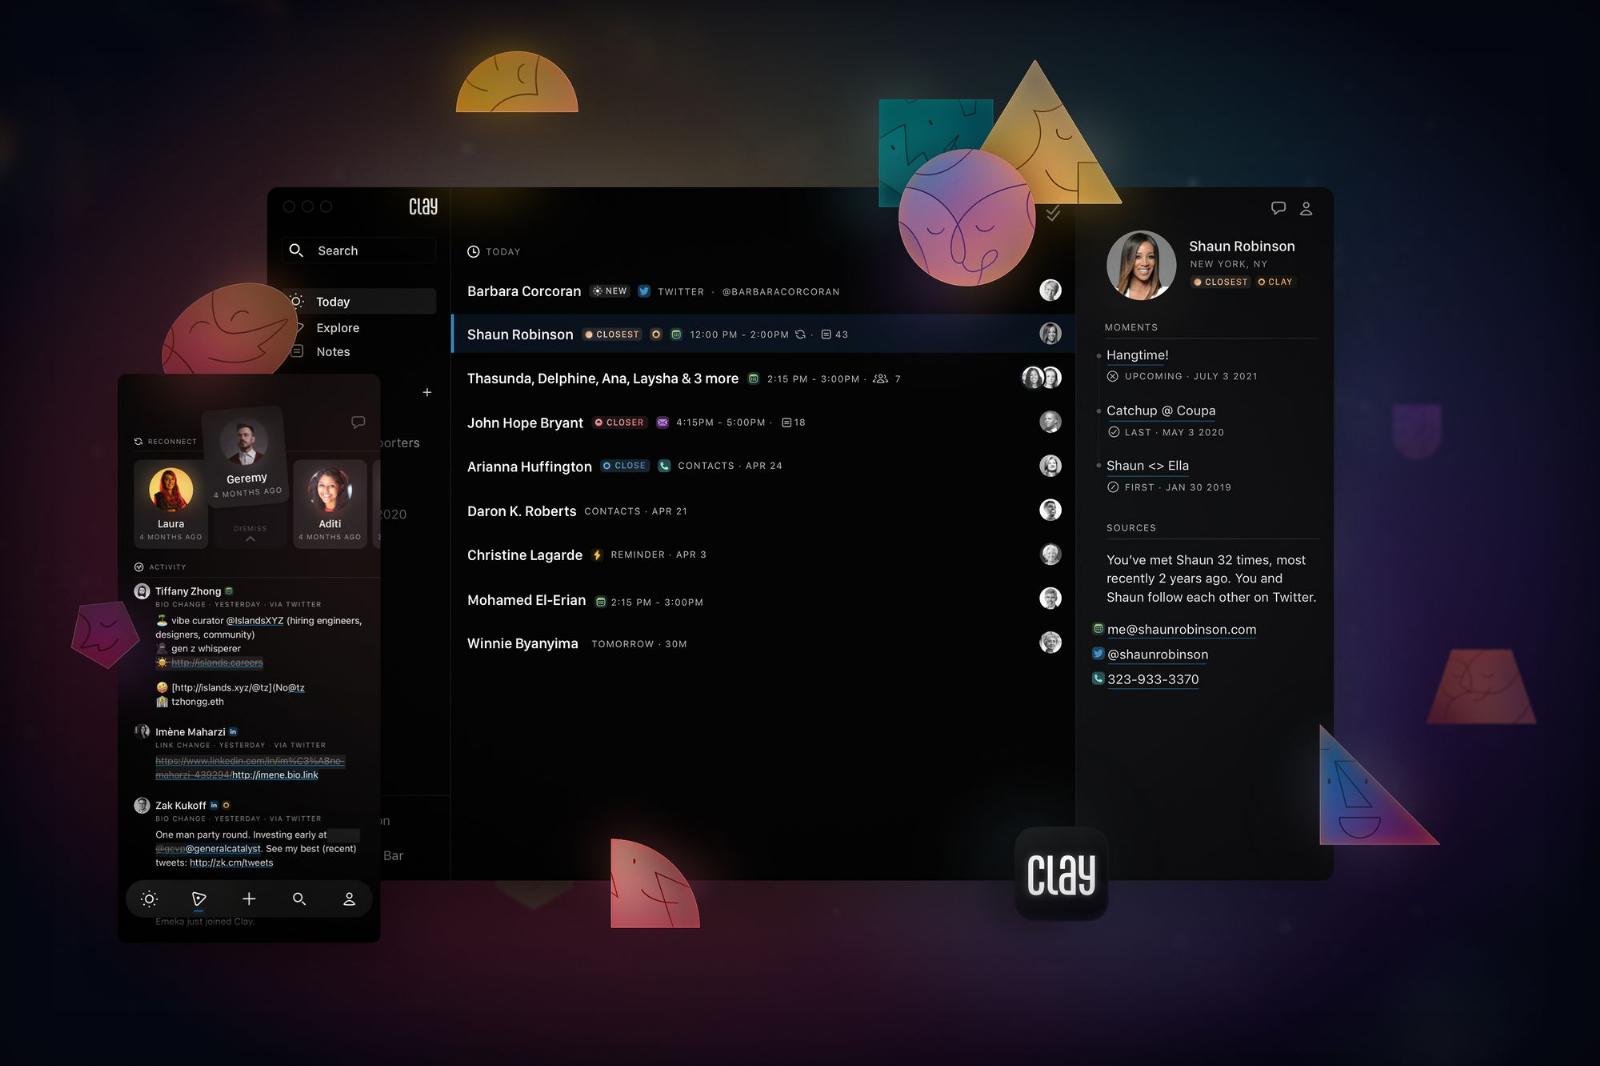 Personal CRM app Clay adds an AI helper to help you navigate your relationships